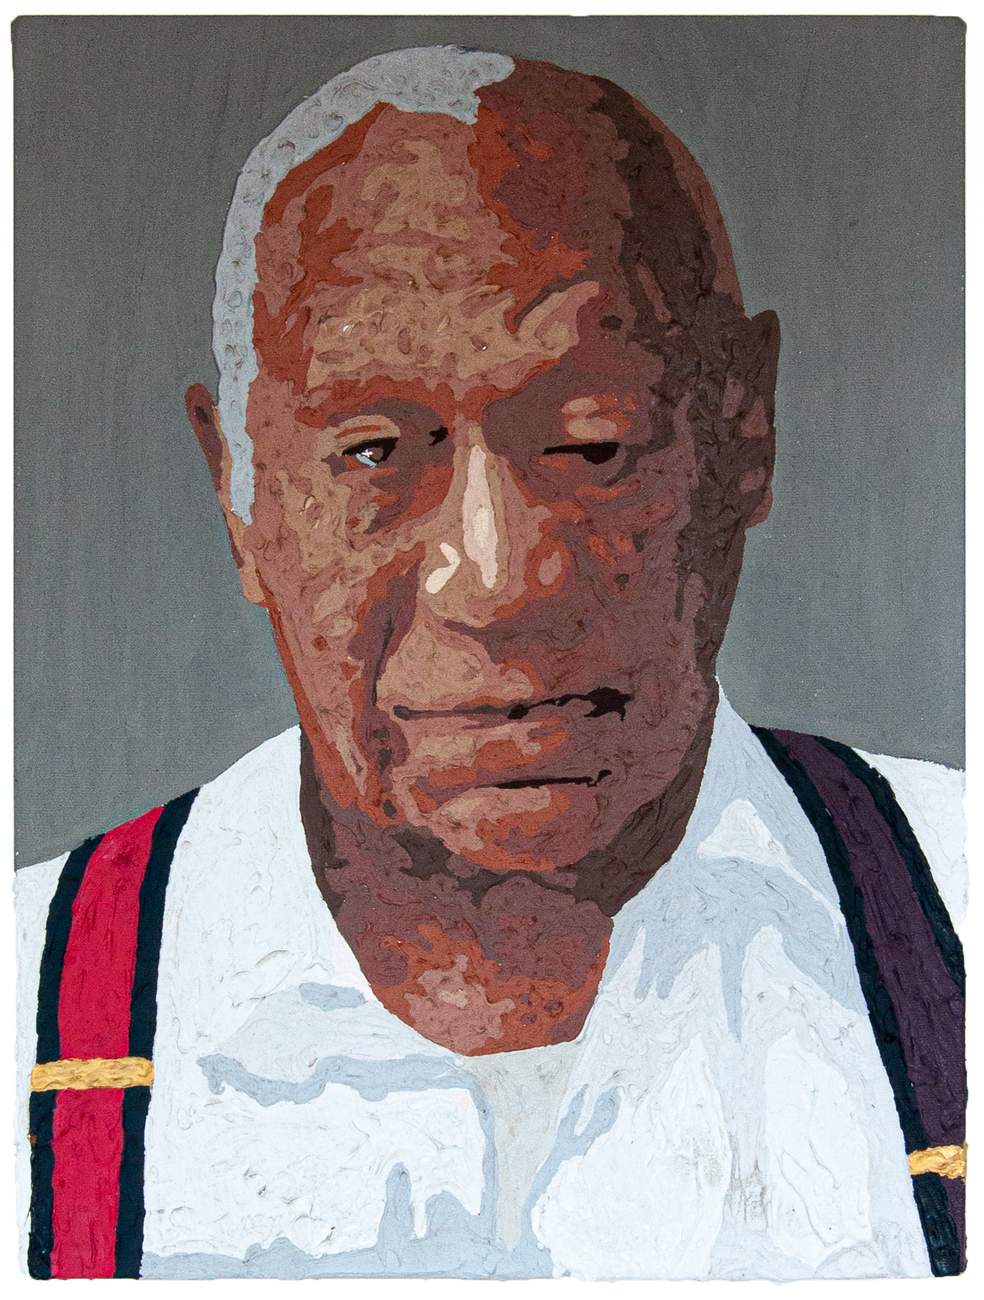 Preview image for Mugshot 12 (Bill Cosby) 